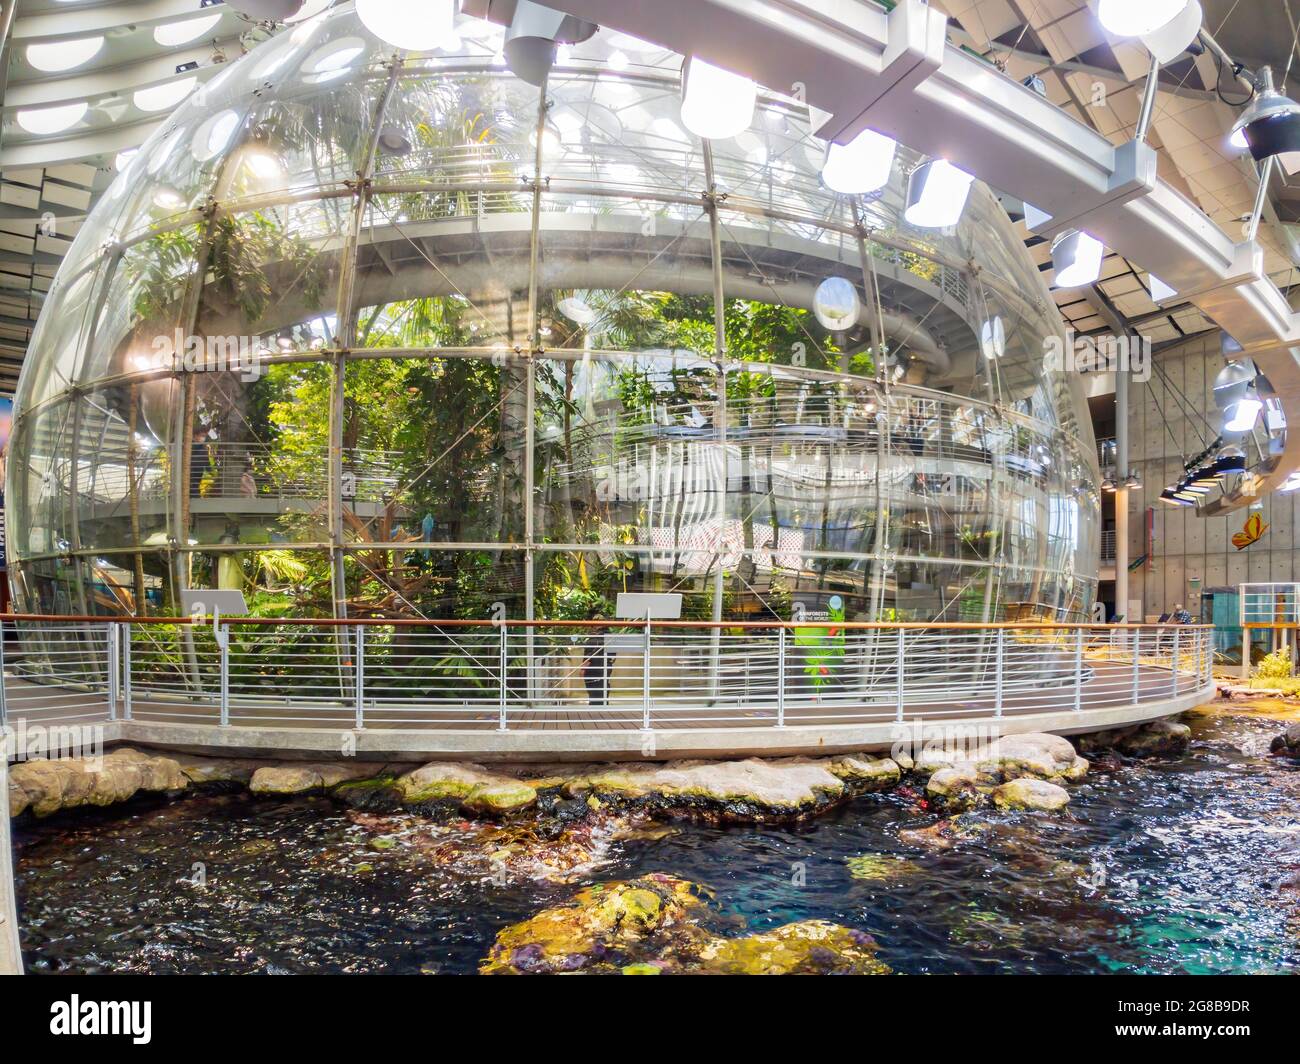 San Francisco, MAY 20, 2021 - Rainforest of the California Academy of ...